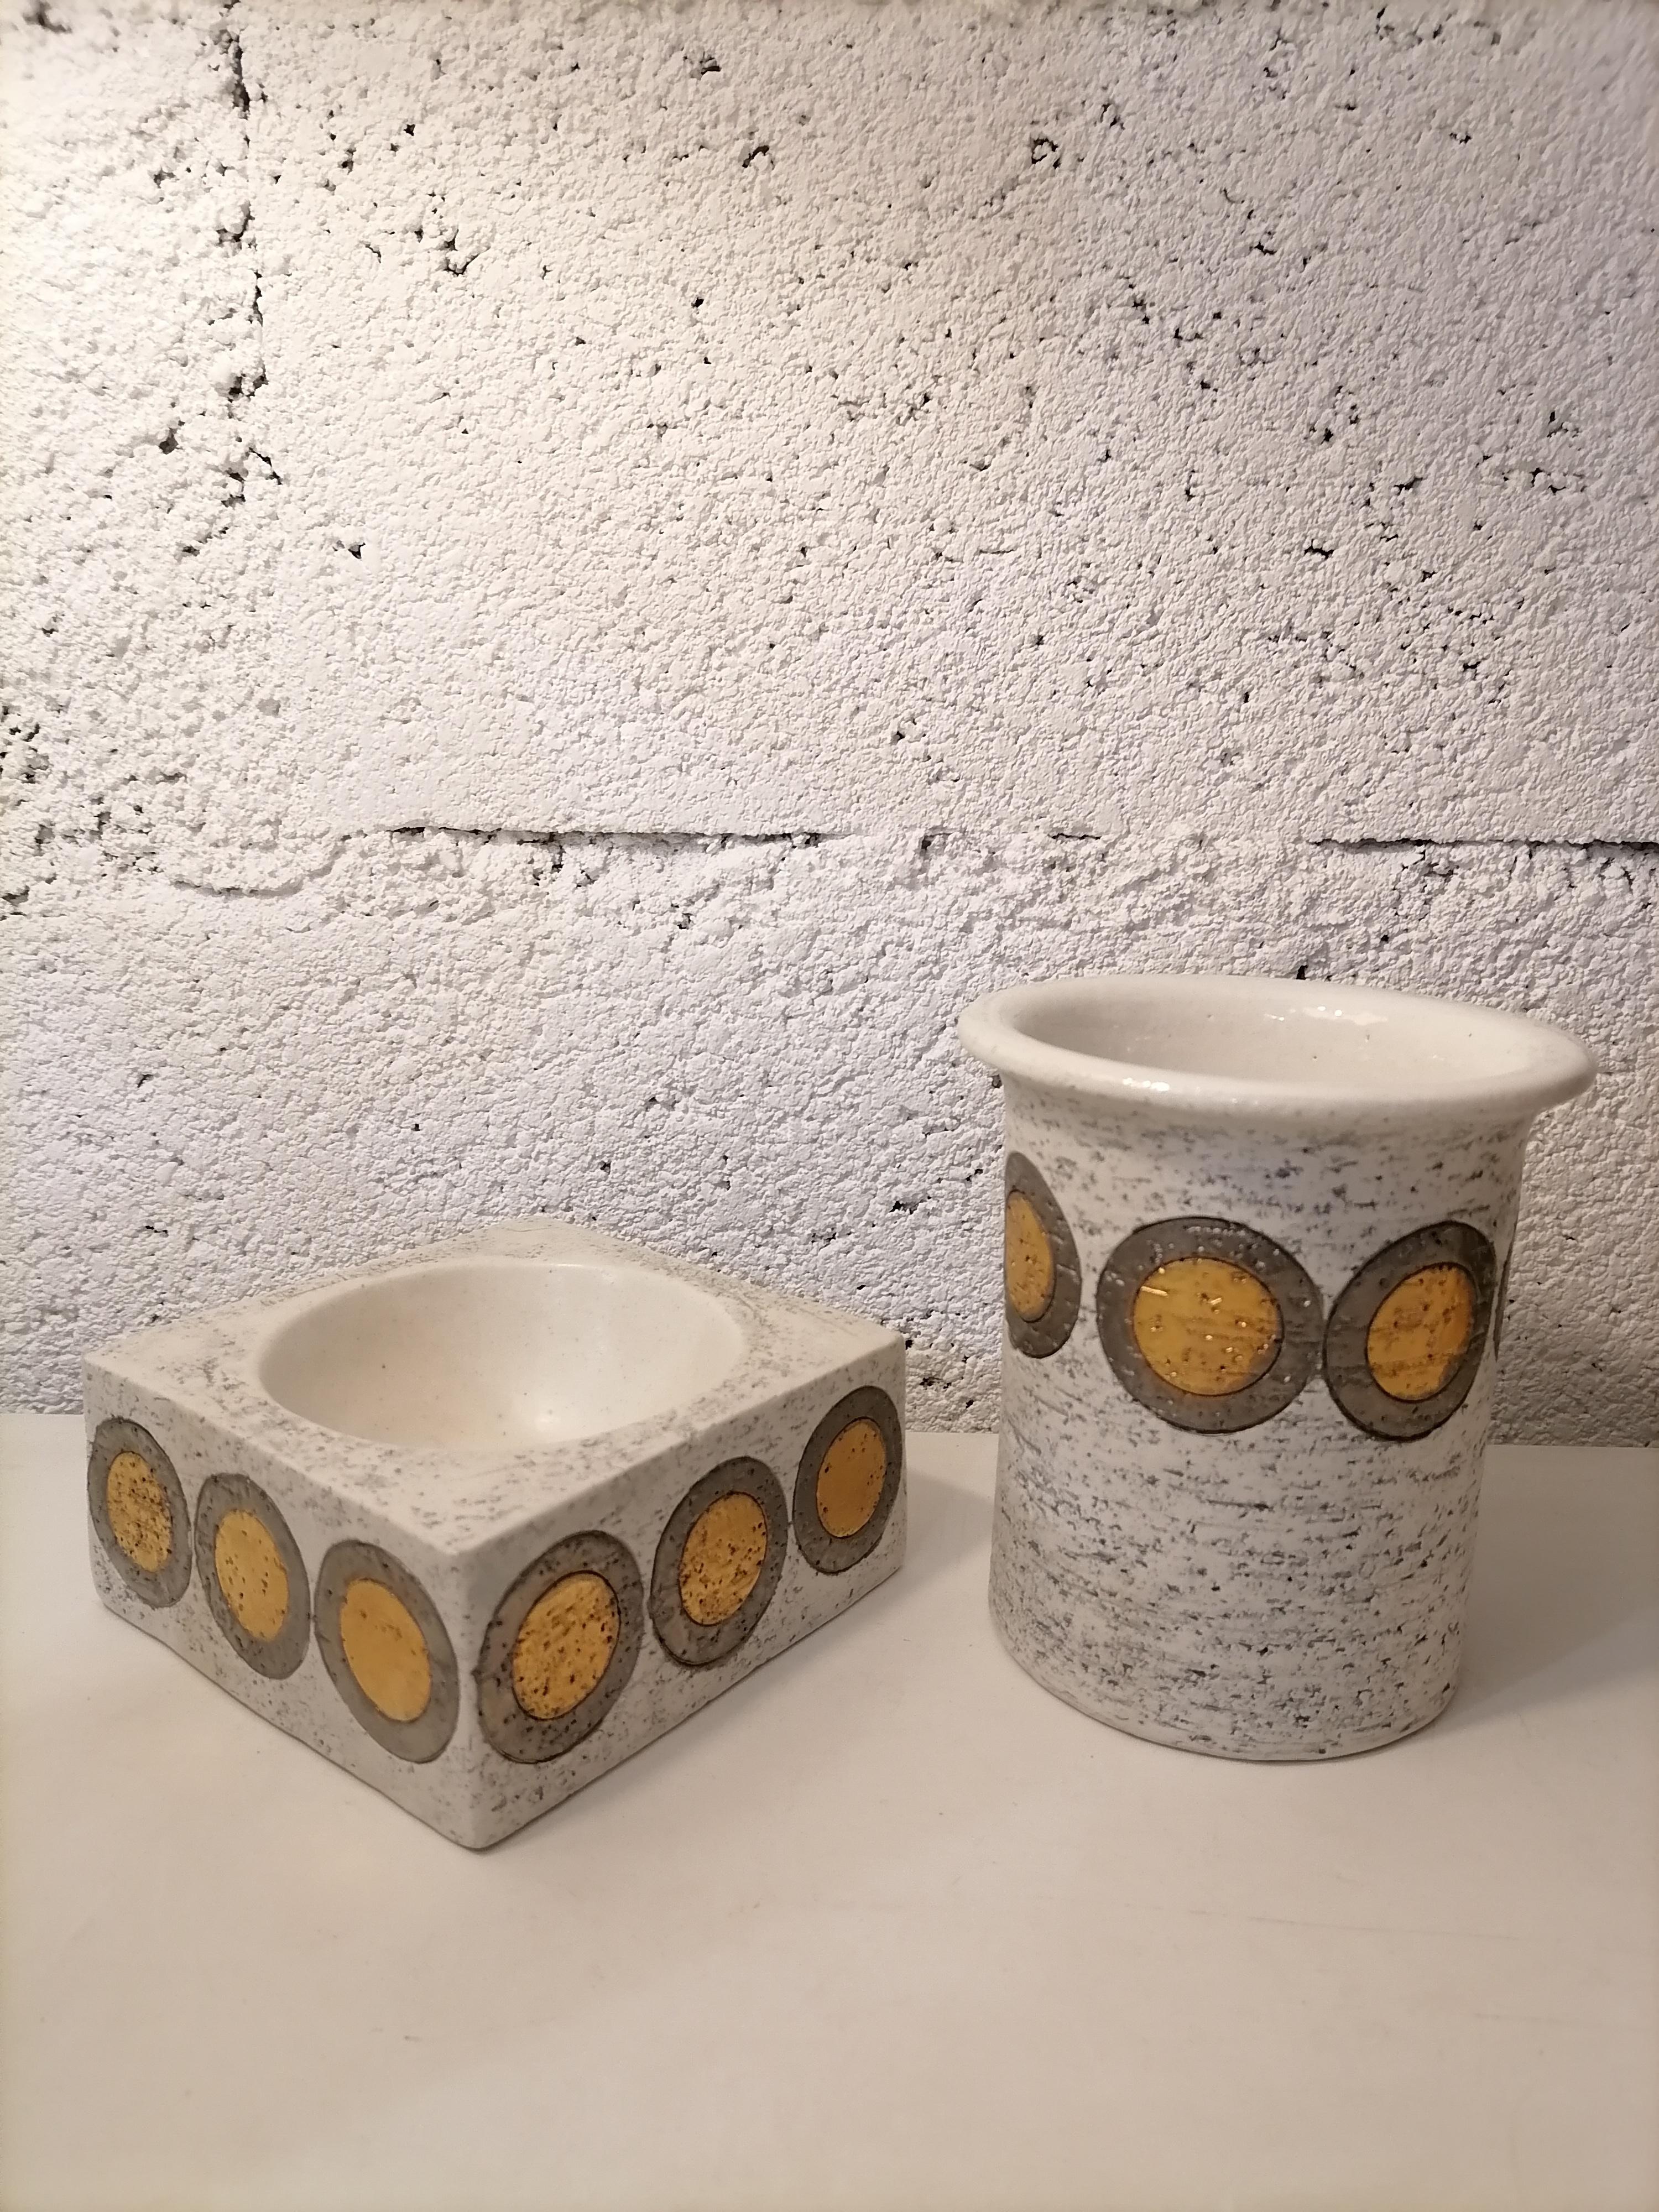 Set of Aldo Londi ceramic pottery vase by Bitossi

A set of 2 midcentury ceramic, one ashtray and one vase

Made in Italy in 1960 by Aldo Londi for Bitossi

Decor with rings of gold and silver 

Measures: Height : 13cm and 4cm
Width : 11cm